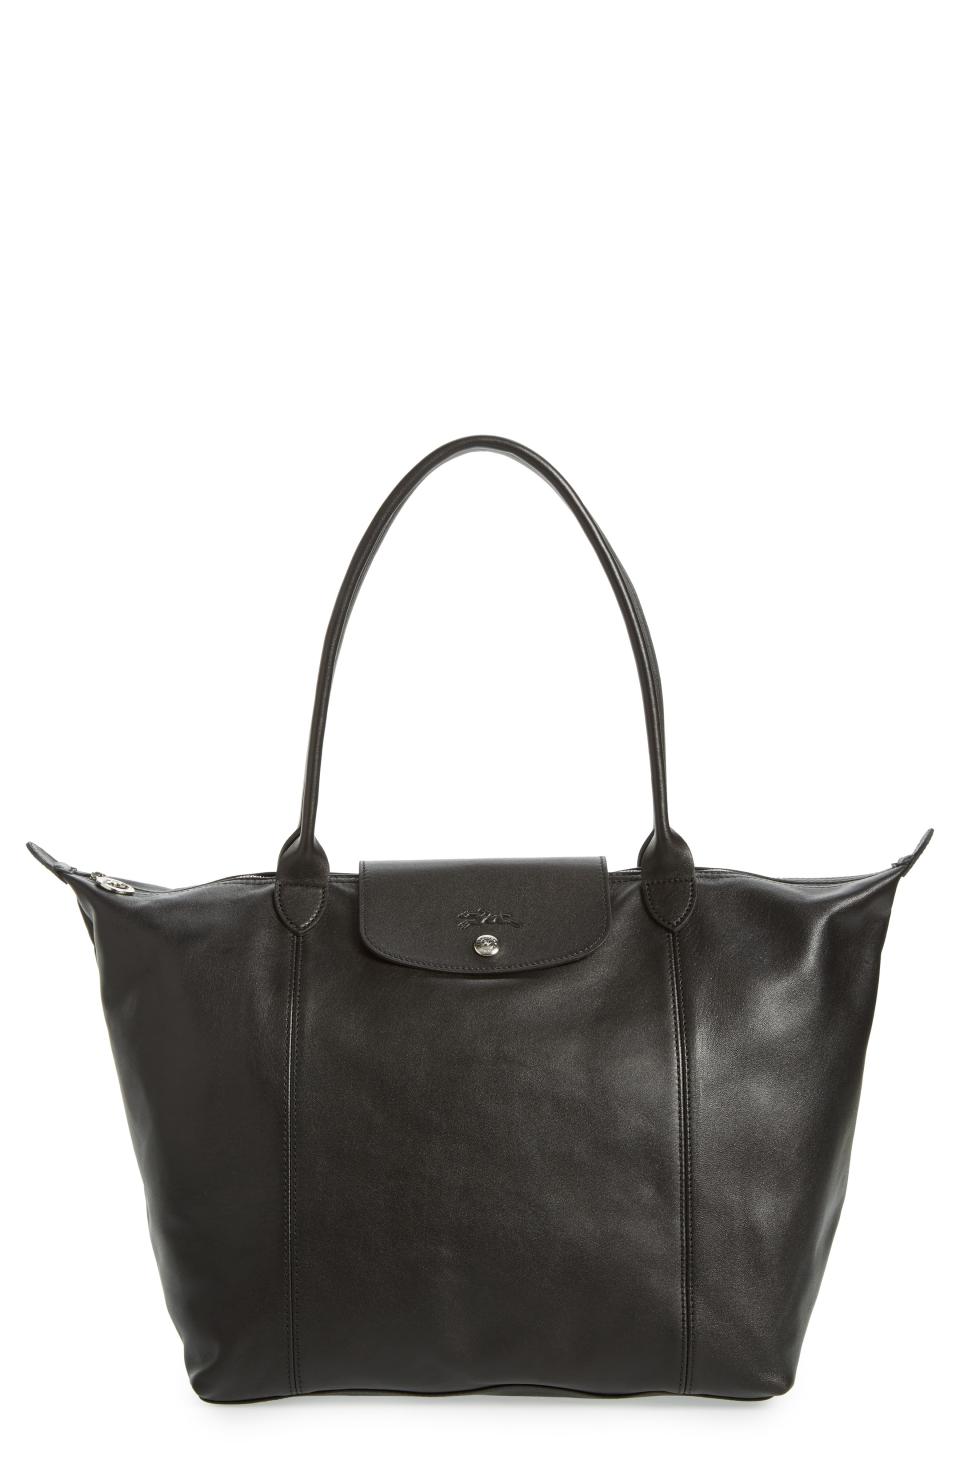 Le Pliage Cuir Leather Tote